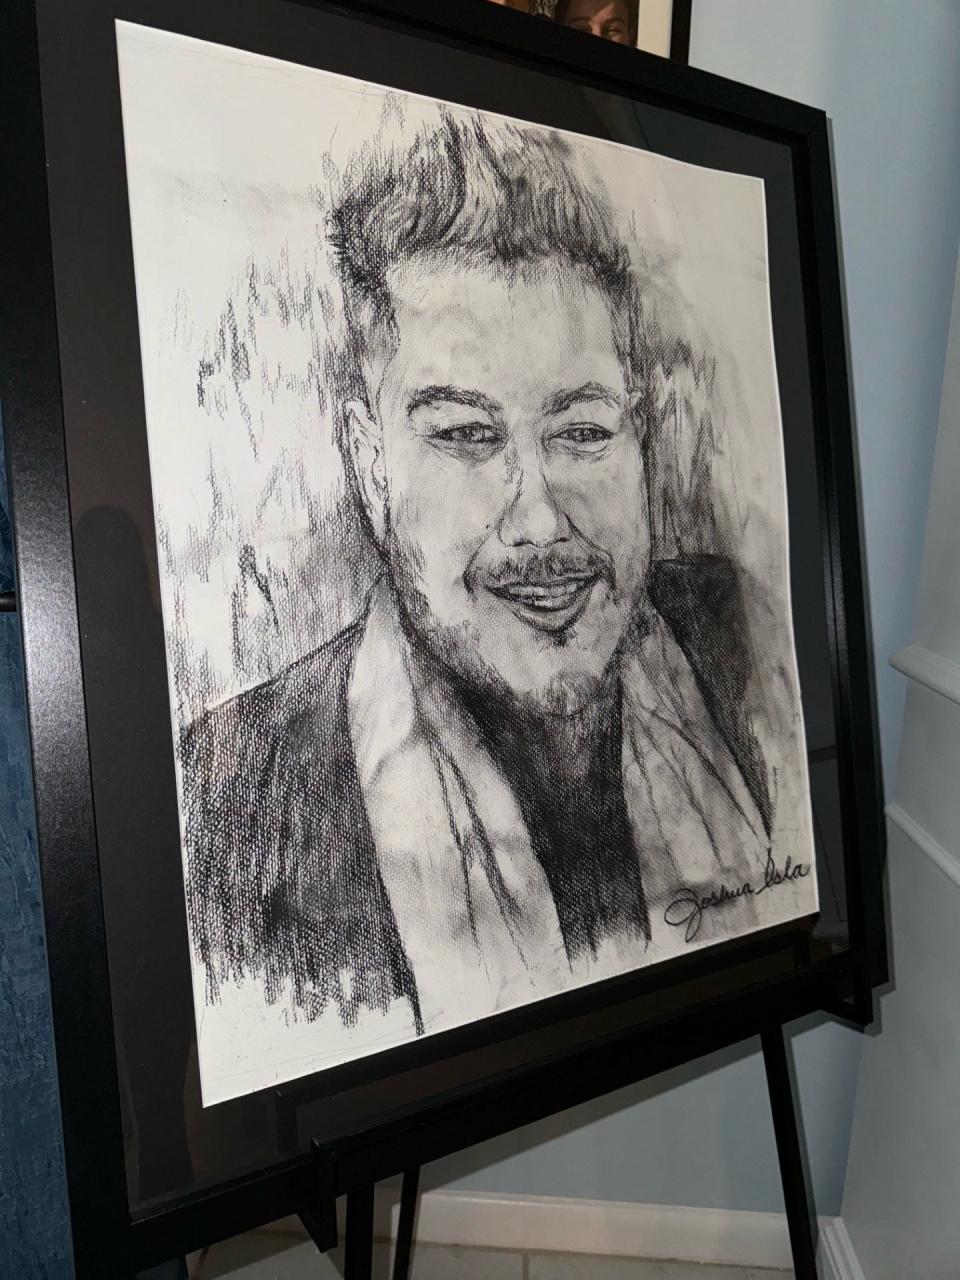 Local artist Joshua Isla of Portrait Therapy Studios presented the family with a drawing of Nito Longinos that now hangs in his parents' home.